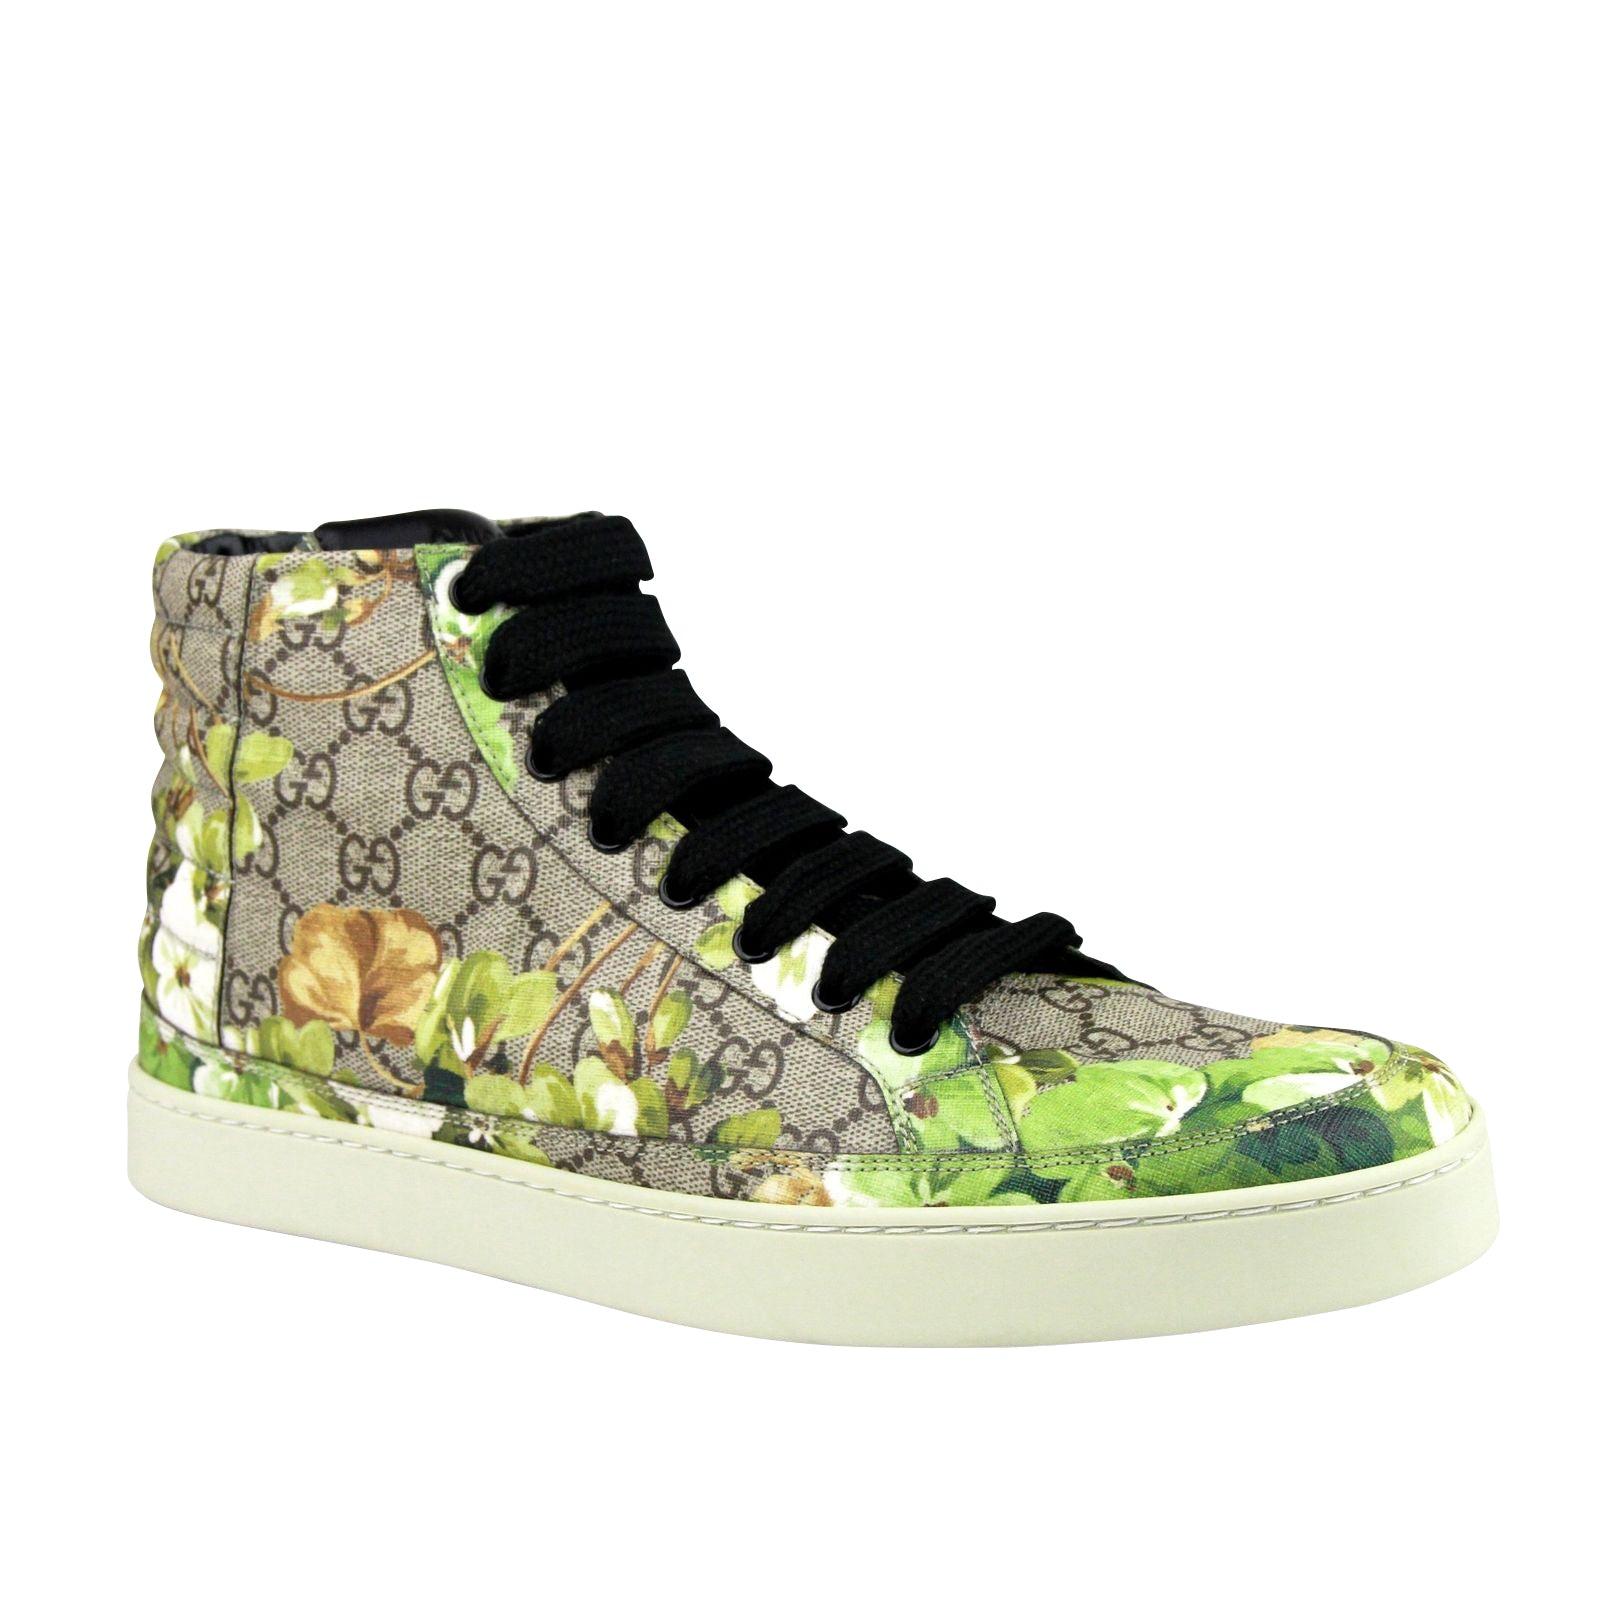 Gucci Bloom Print Supreme gg Canvas Hi Top Sneakers Shoes 407342 8960 in  Green for Men - Save 18% | Lyst